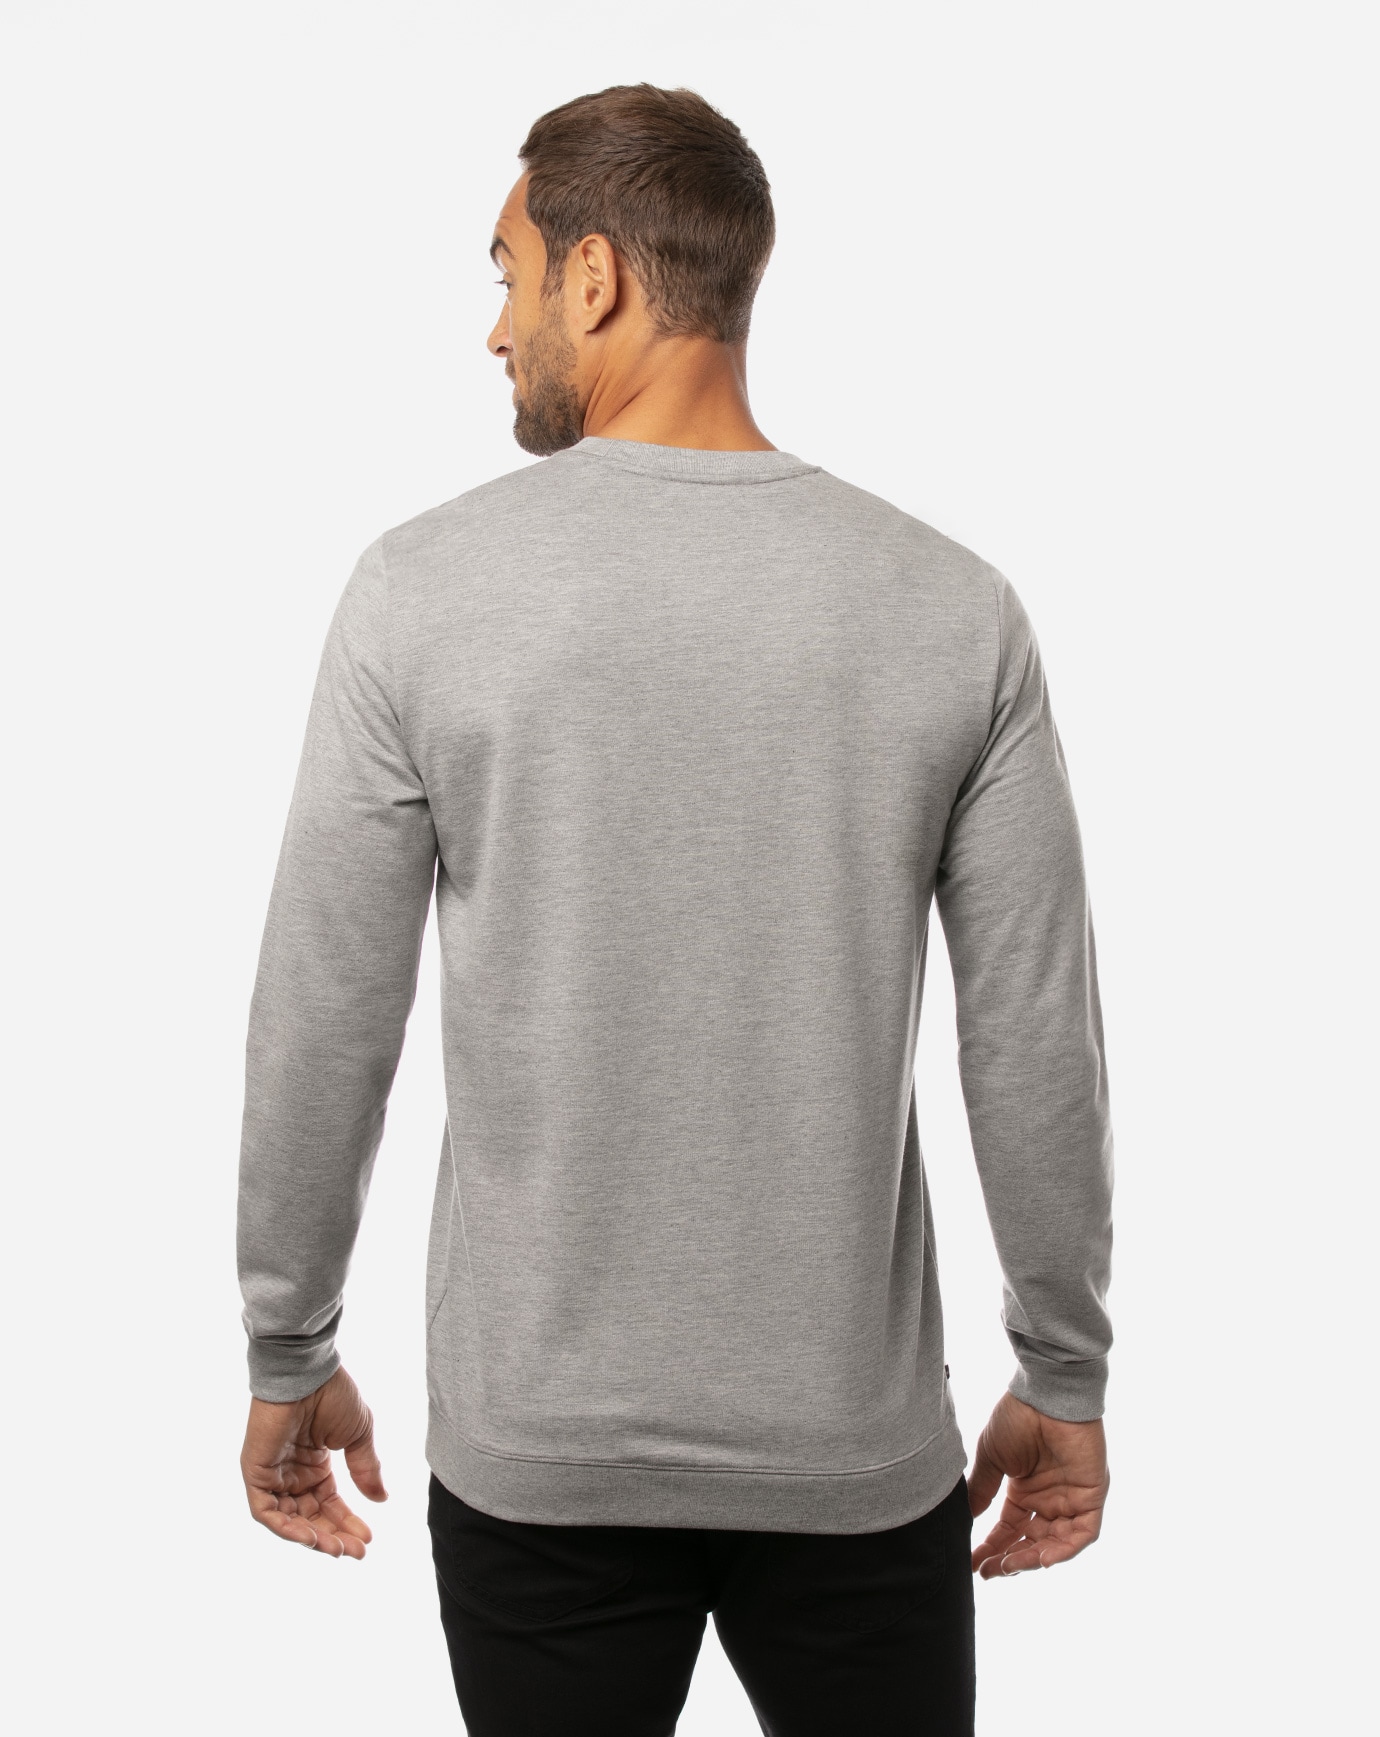 Father Fencing Mens Fitness Unique Design Trend Warm Long Sleeves T-Shirts